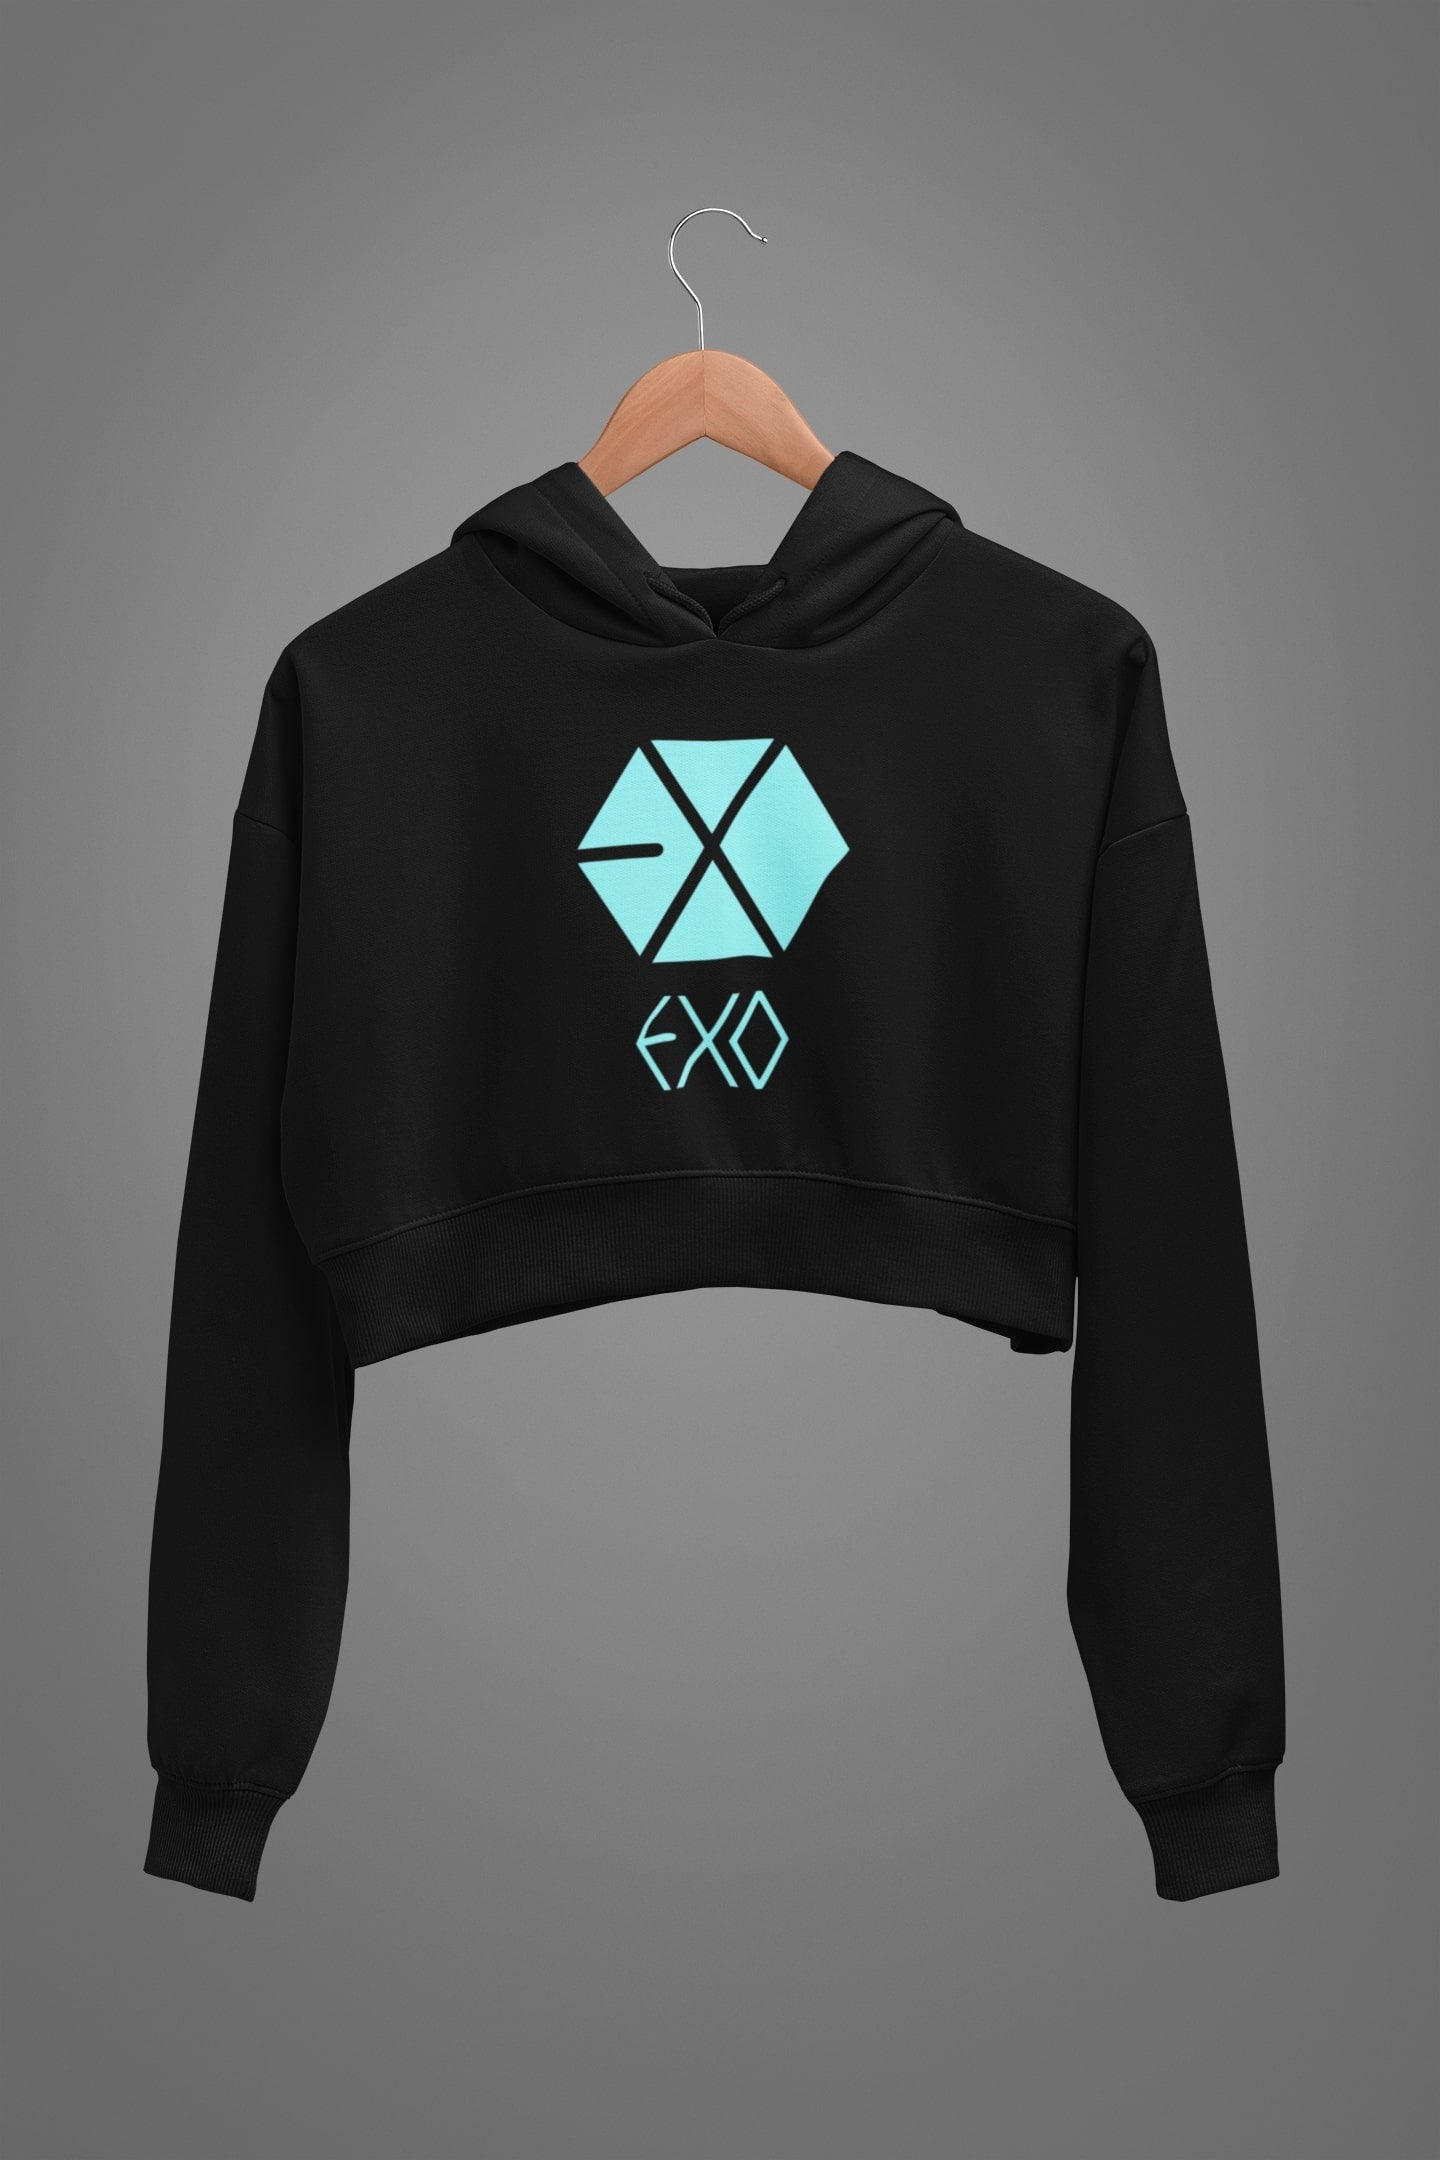 thelegalgang,EXO Graphic Crop Hoodies,.